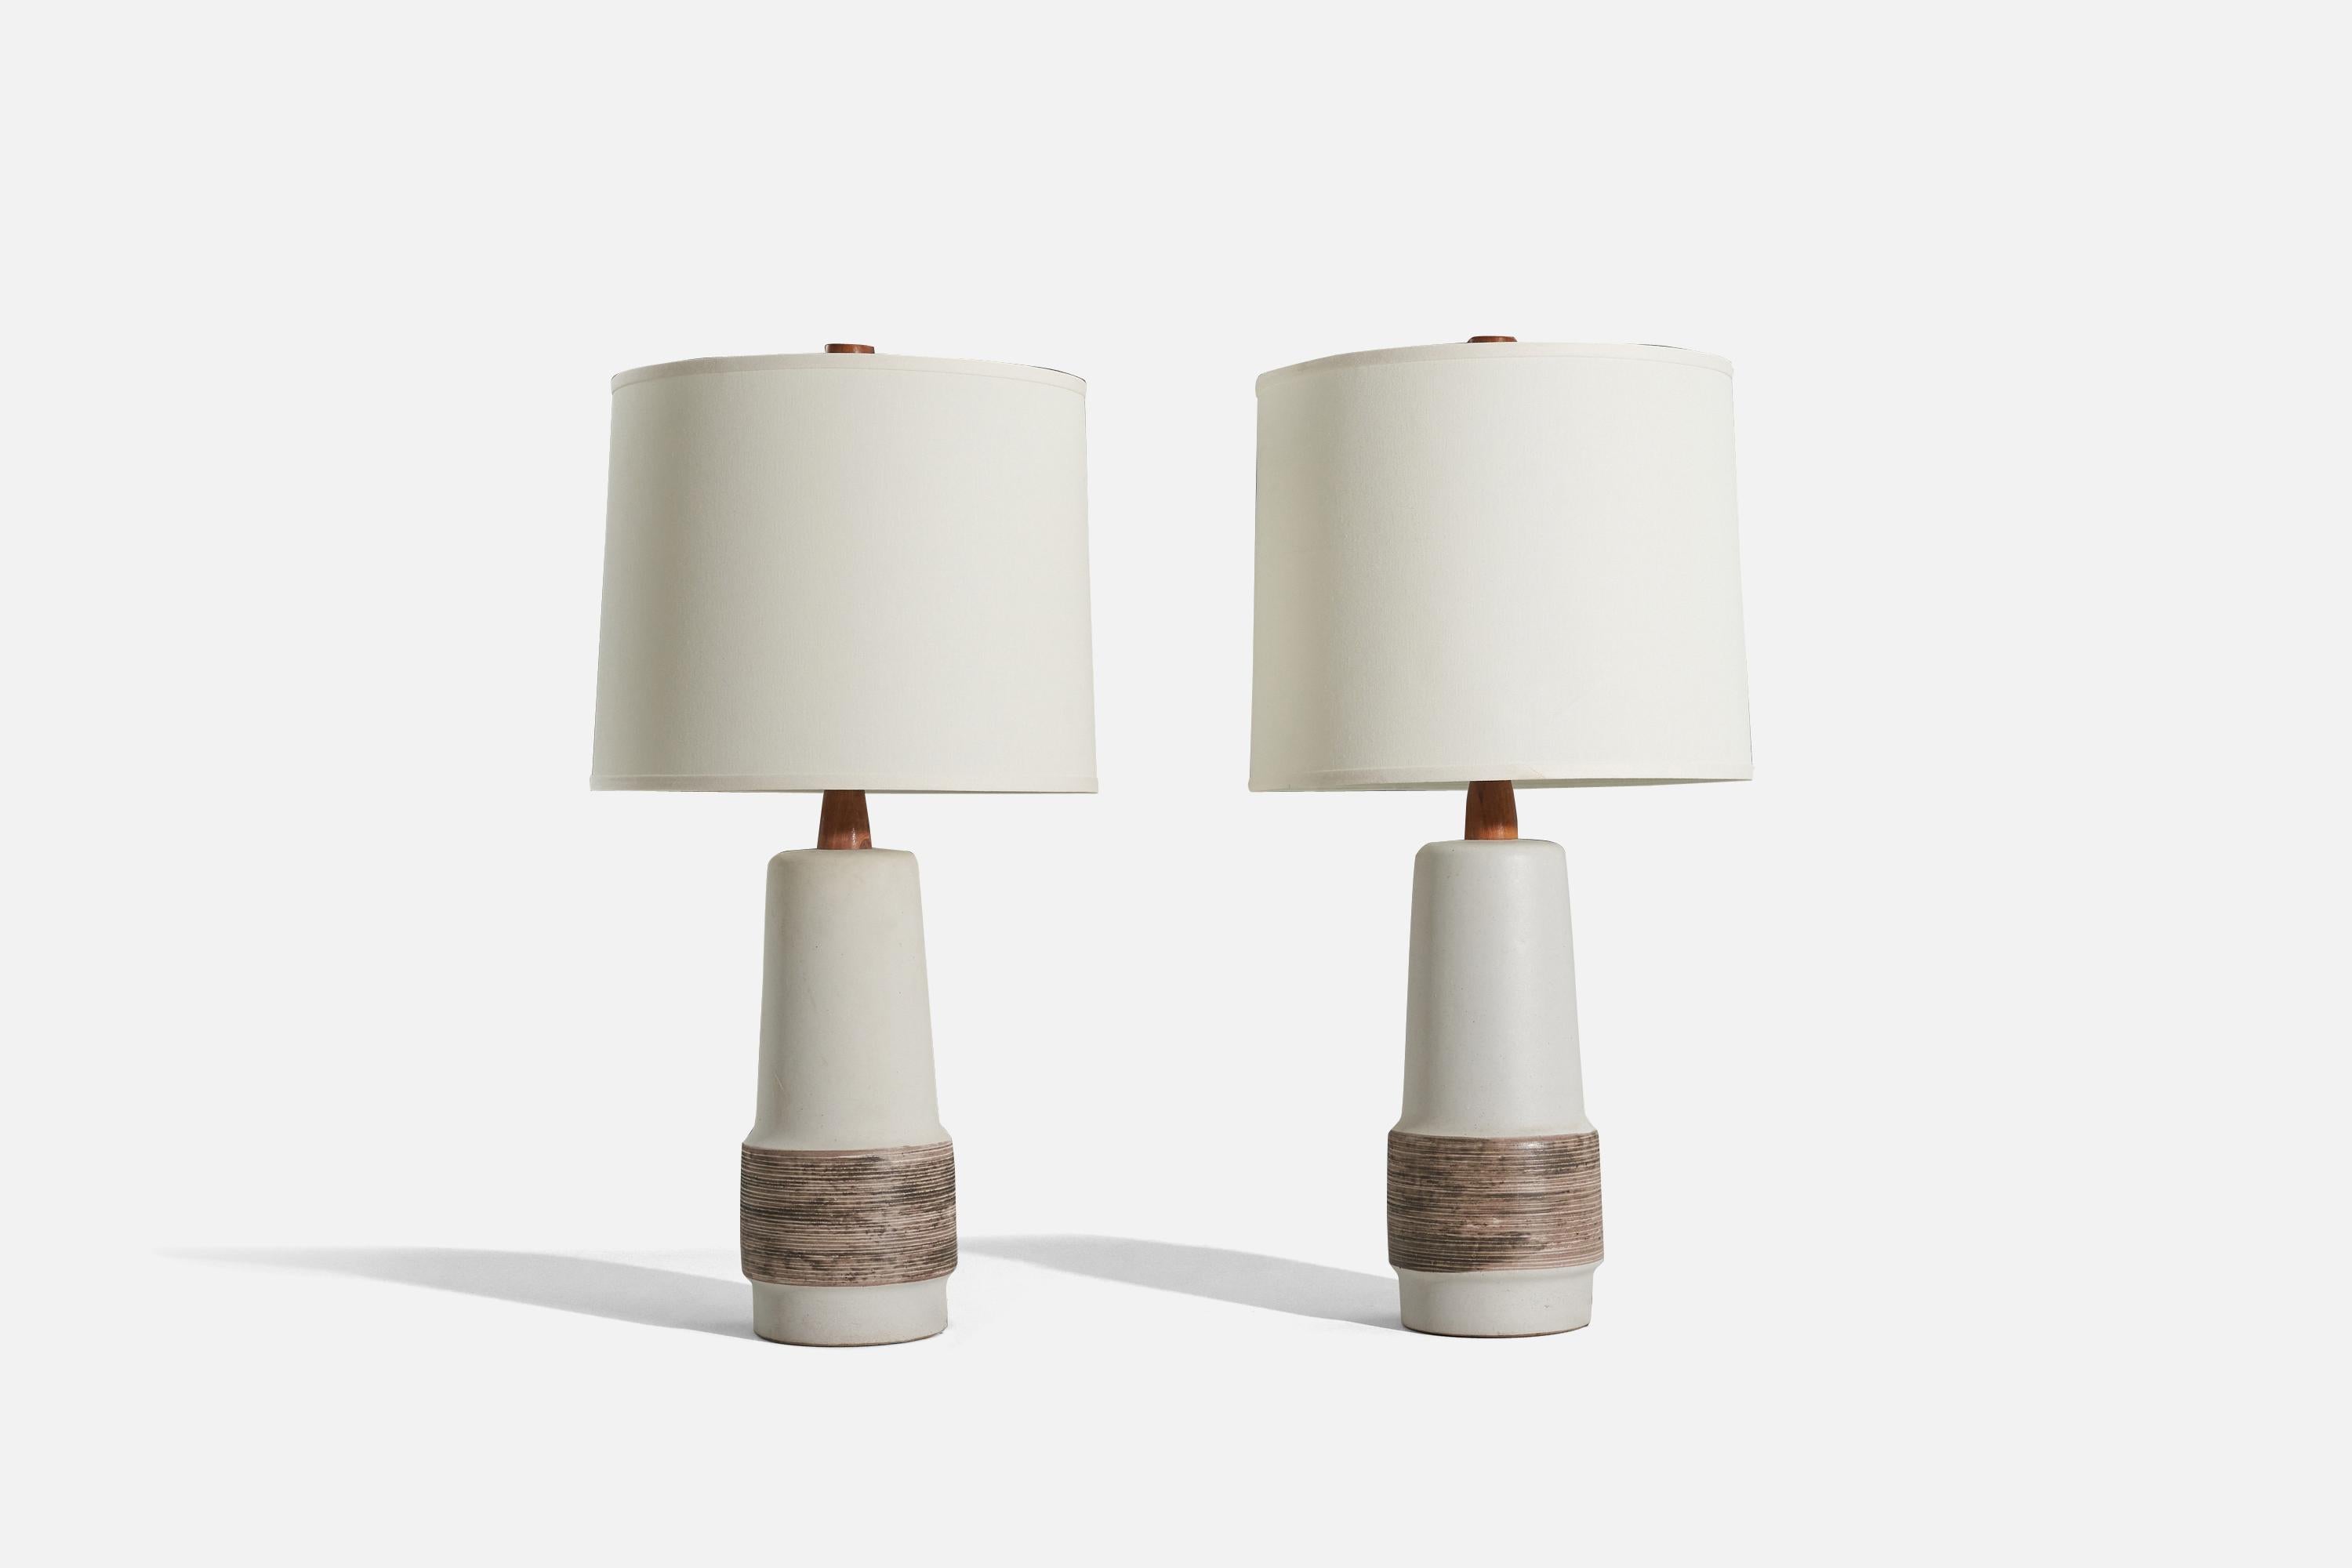 A pair of walnut and white and brown ceramic table lamps designed by Jane & Gordon Martz and produced by Marshall Studios, Indianapolis, c. 1960s. 

Sold without lampshade. 
Dimensions of lamp (inches) : 20.5 x 6.675 x 6.675 (H x W x